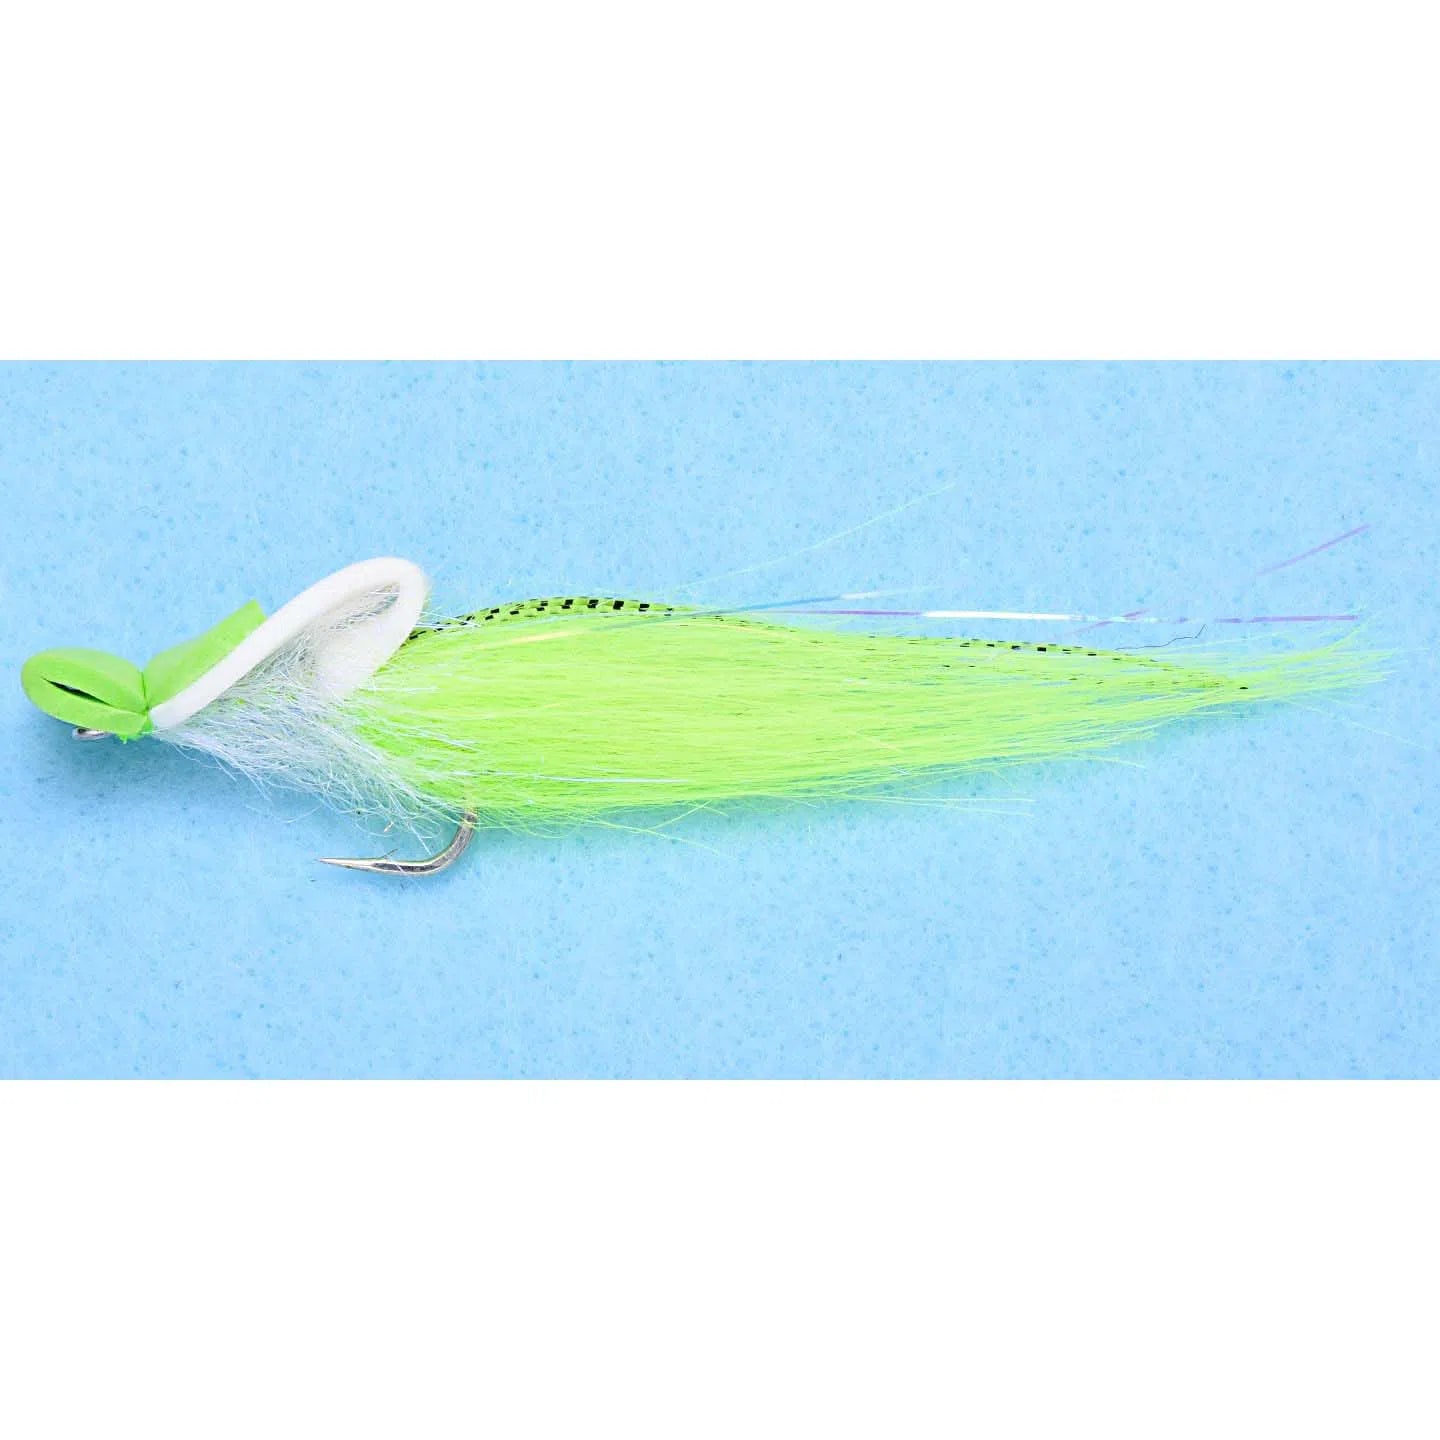 Enrico Puglisi Top Water Shrimp Fly-Lure - Saltwater Fly-Enrico Puglisi-White/Treuse-Size #2/0-Fishing Station